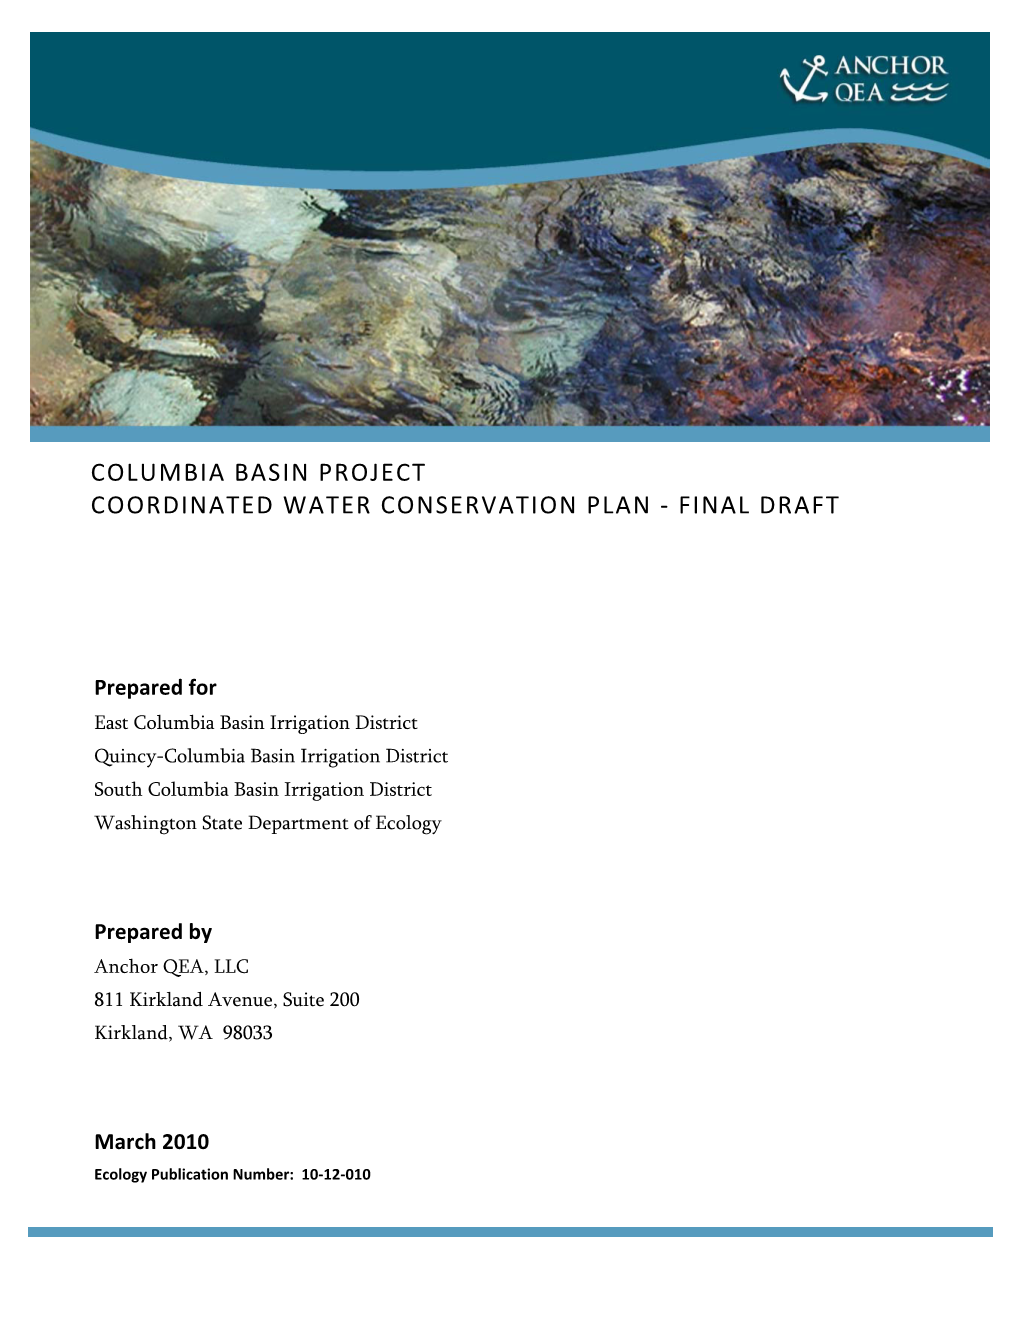 Columbia Basin Project Coordinated Water Conservation Plan ‐ Final Draft